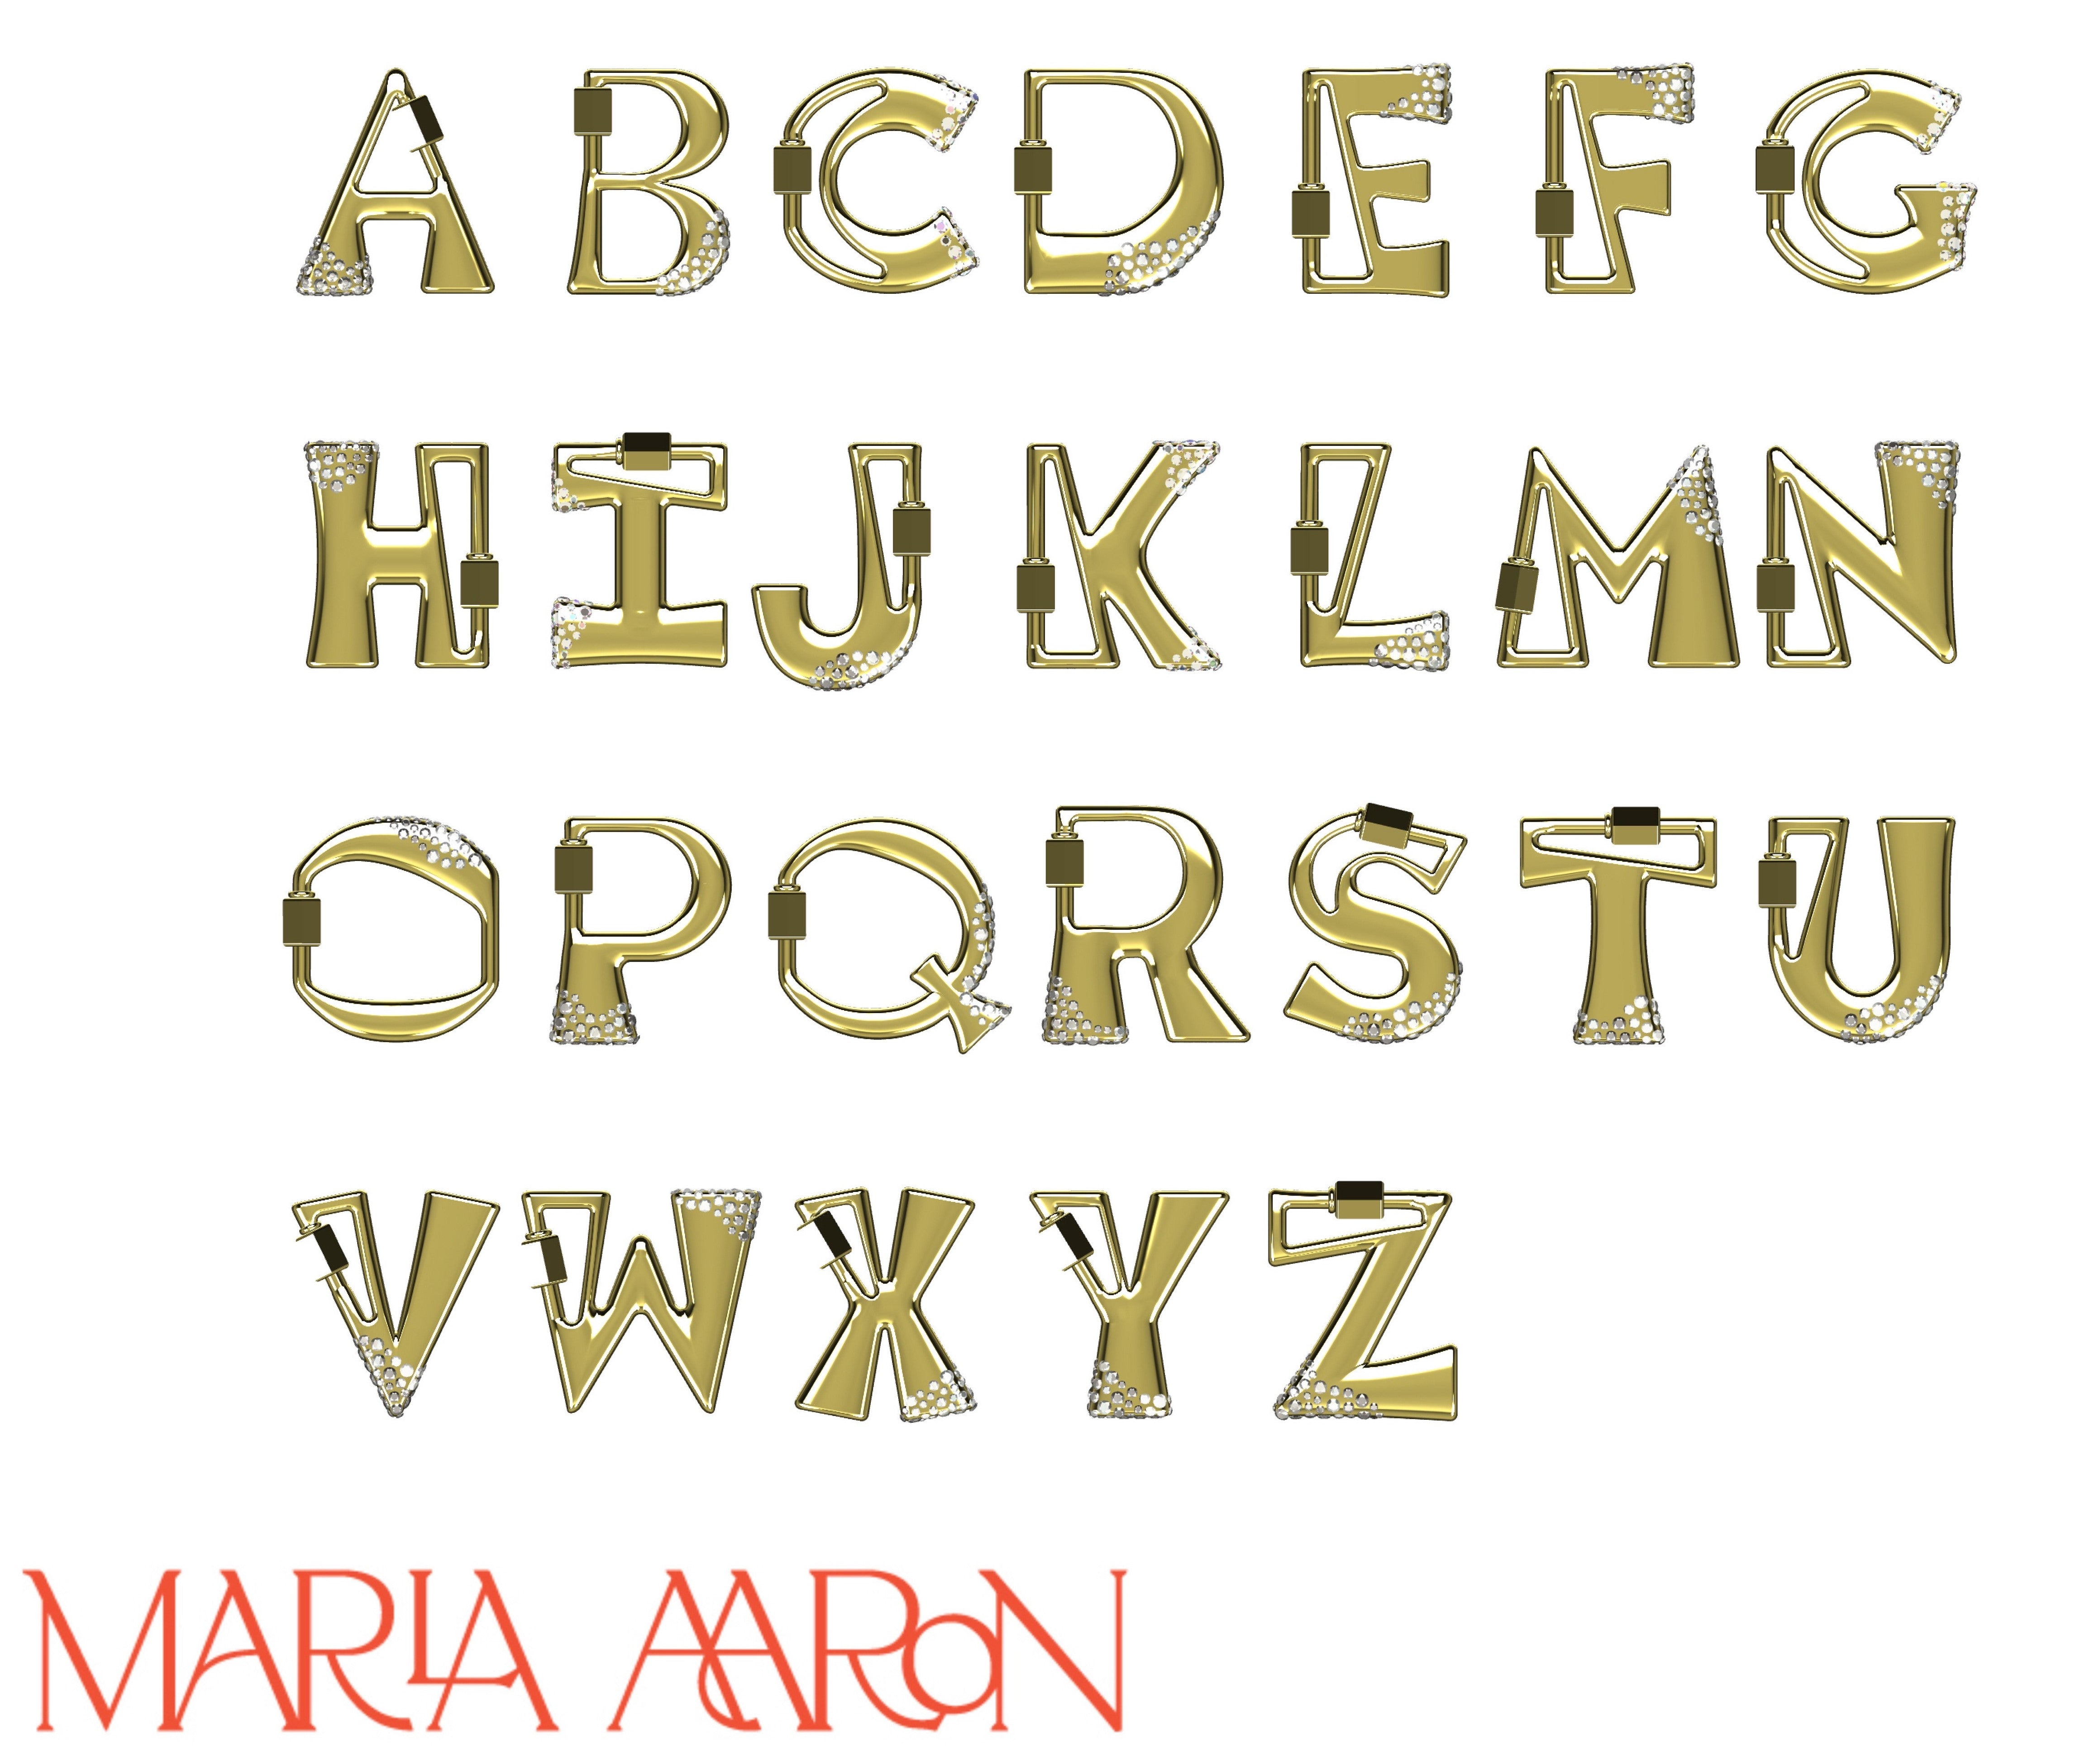 Gold locks of every letter of the alphabet including V charm against white backdrop with Marla Aaron logo in bottom left corner